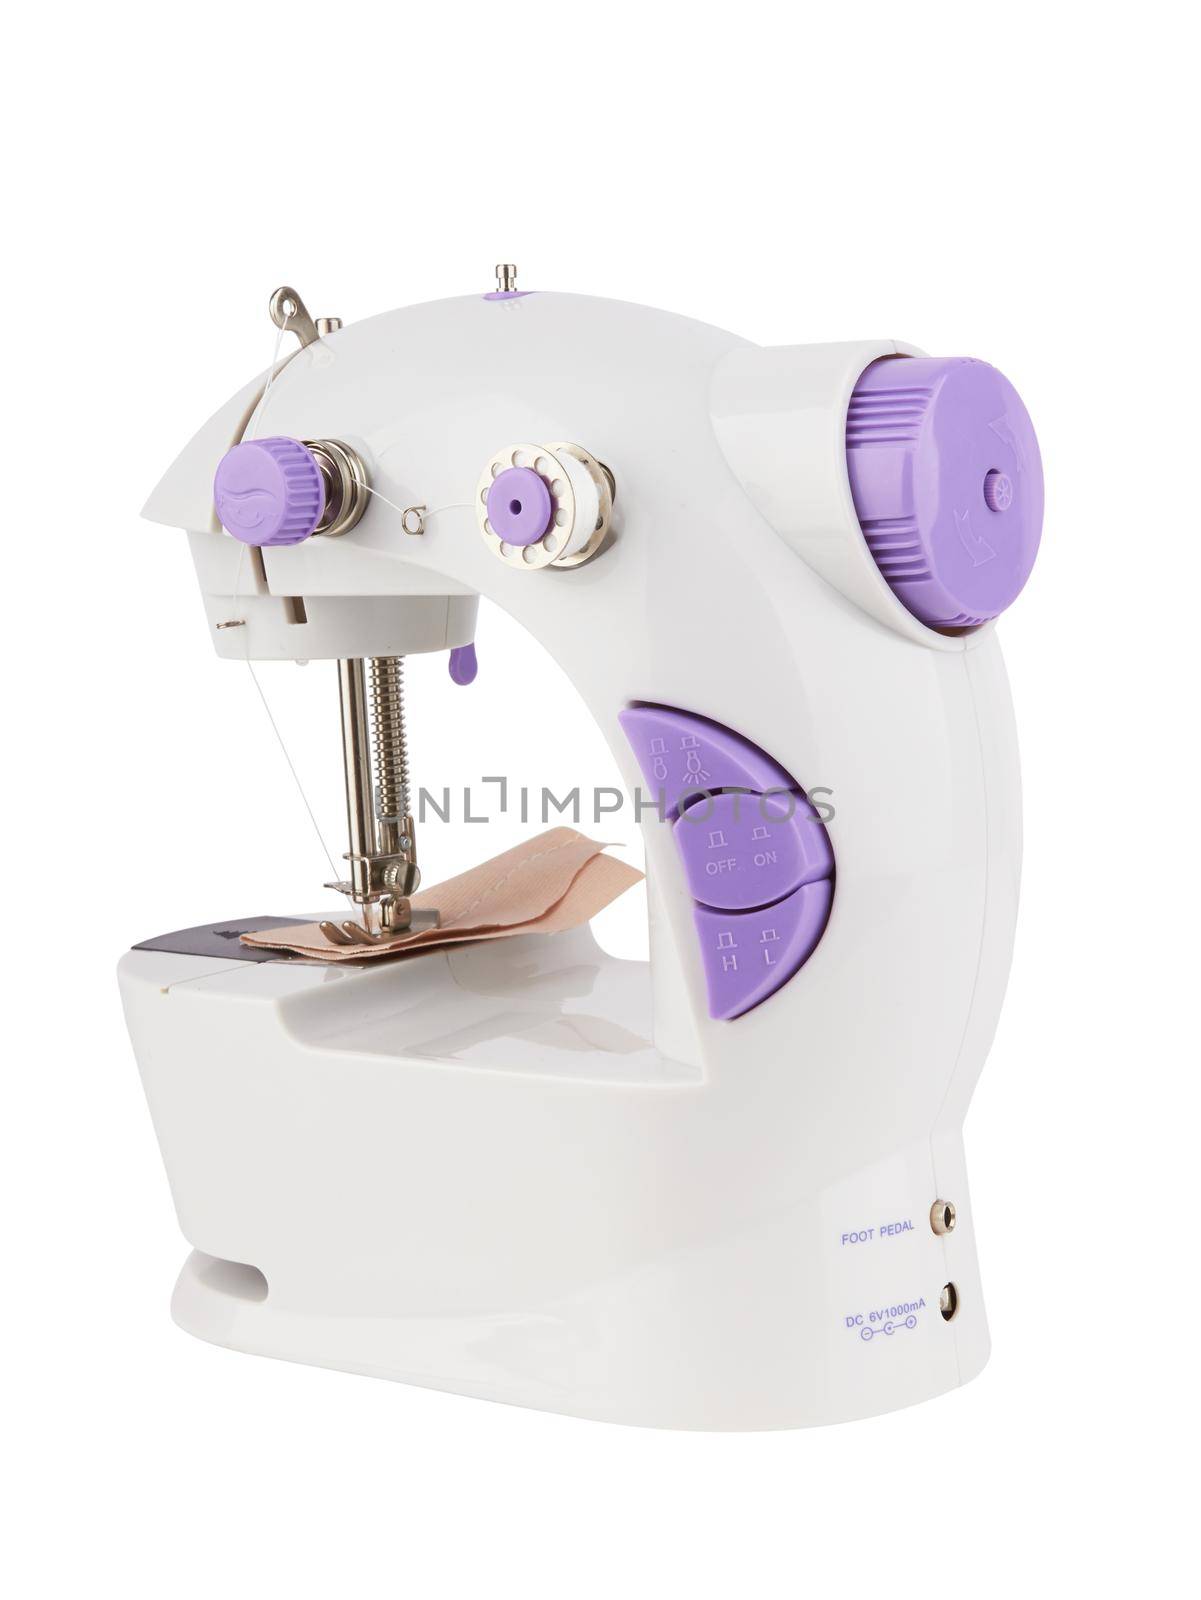 Sewing machine isolated by pioneer111